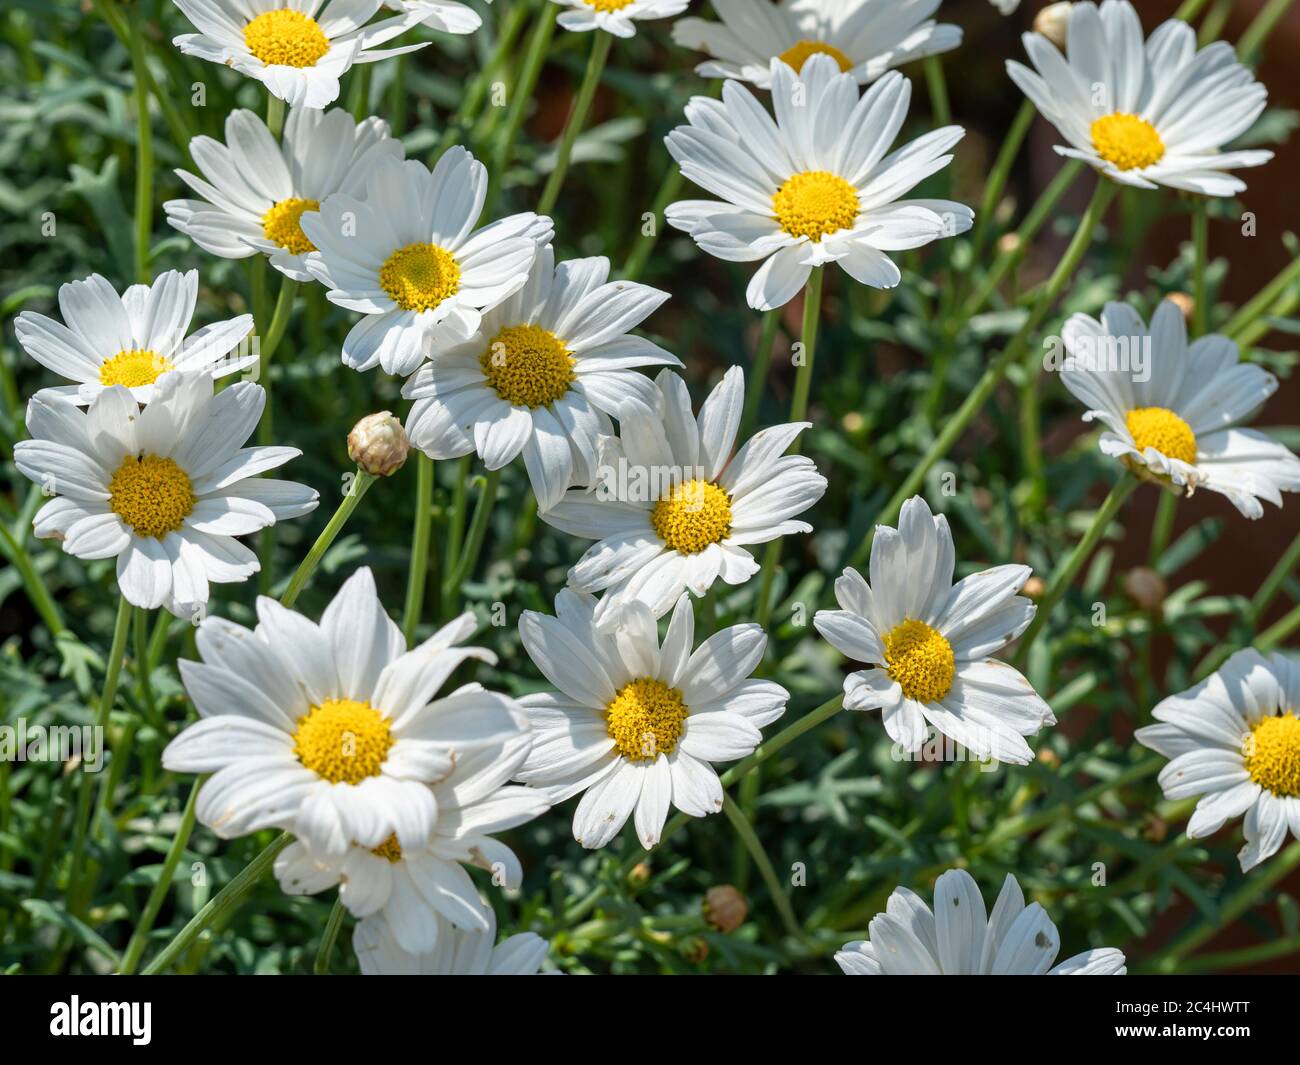 Closeup of lovely white daisies catching sunlight in a garden Stock Photo